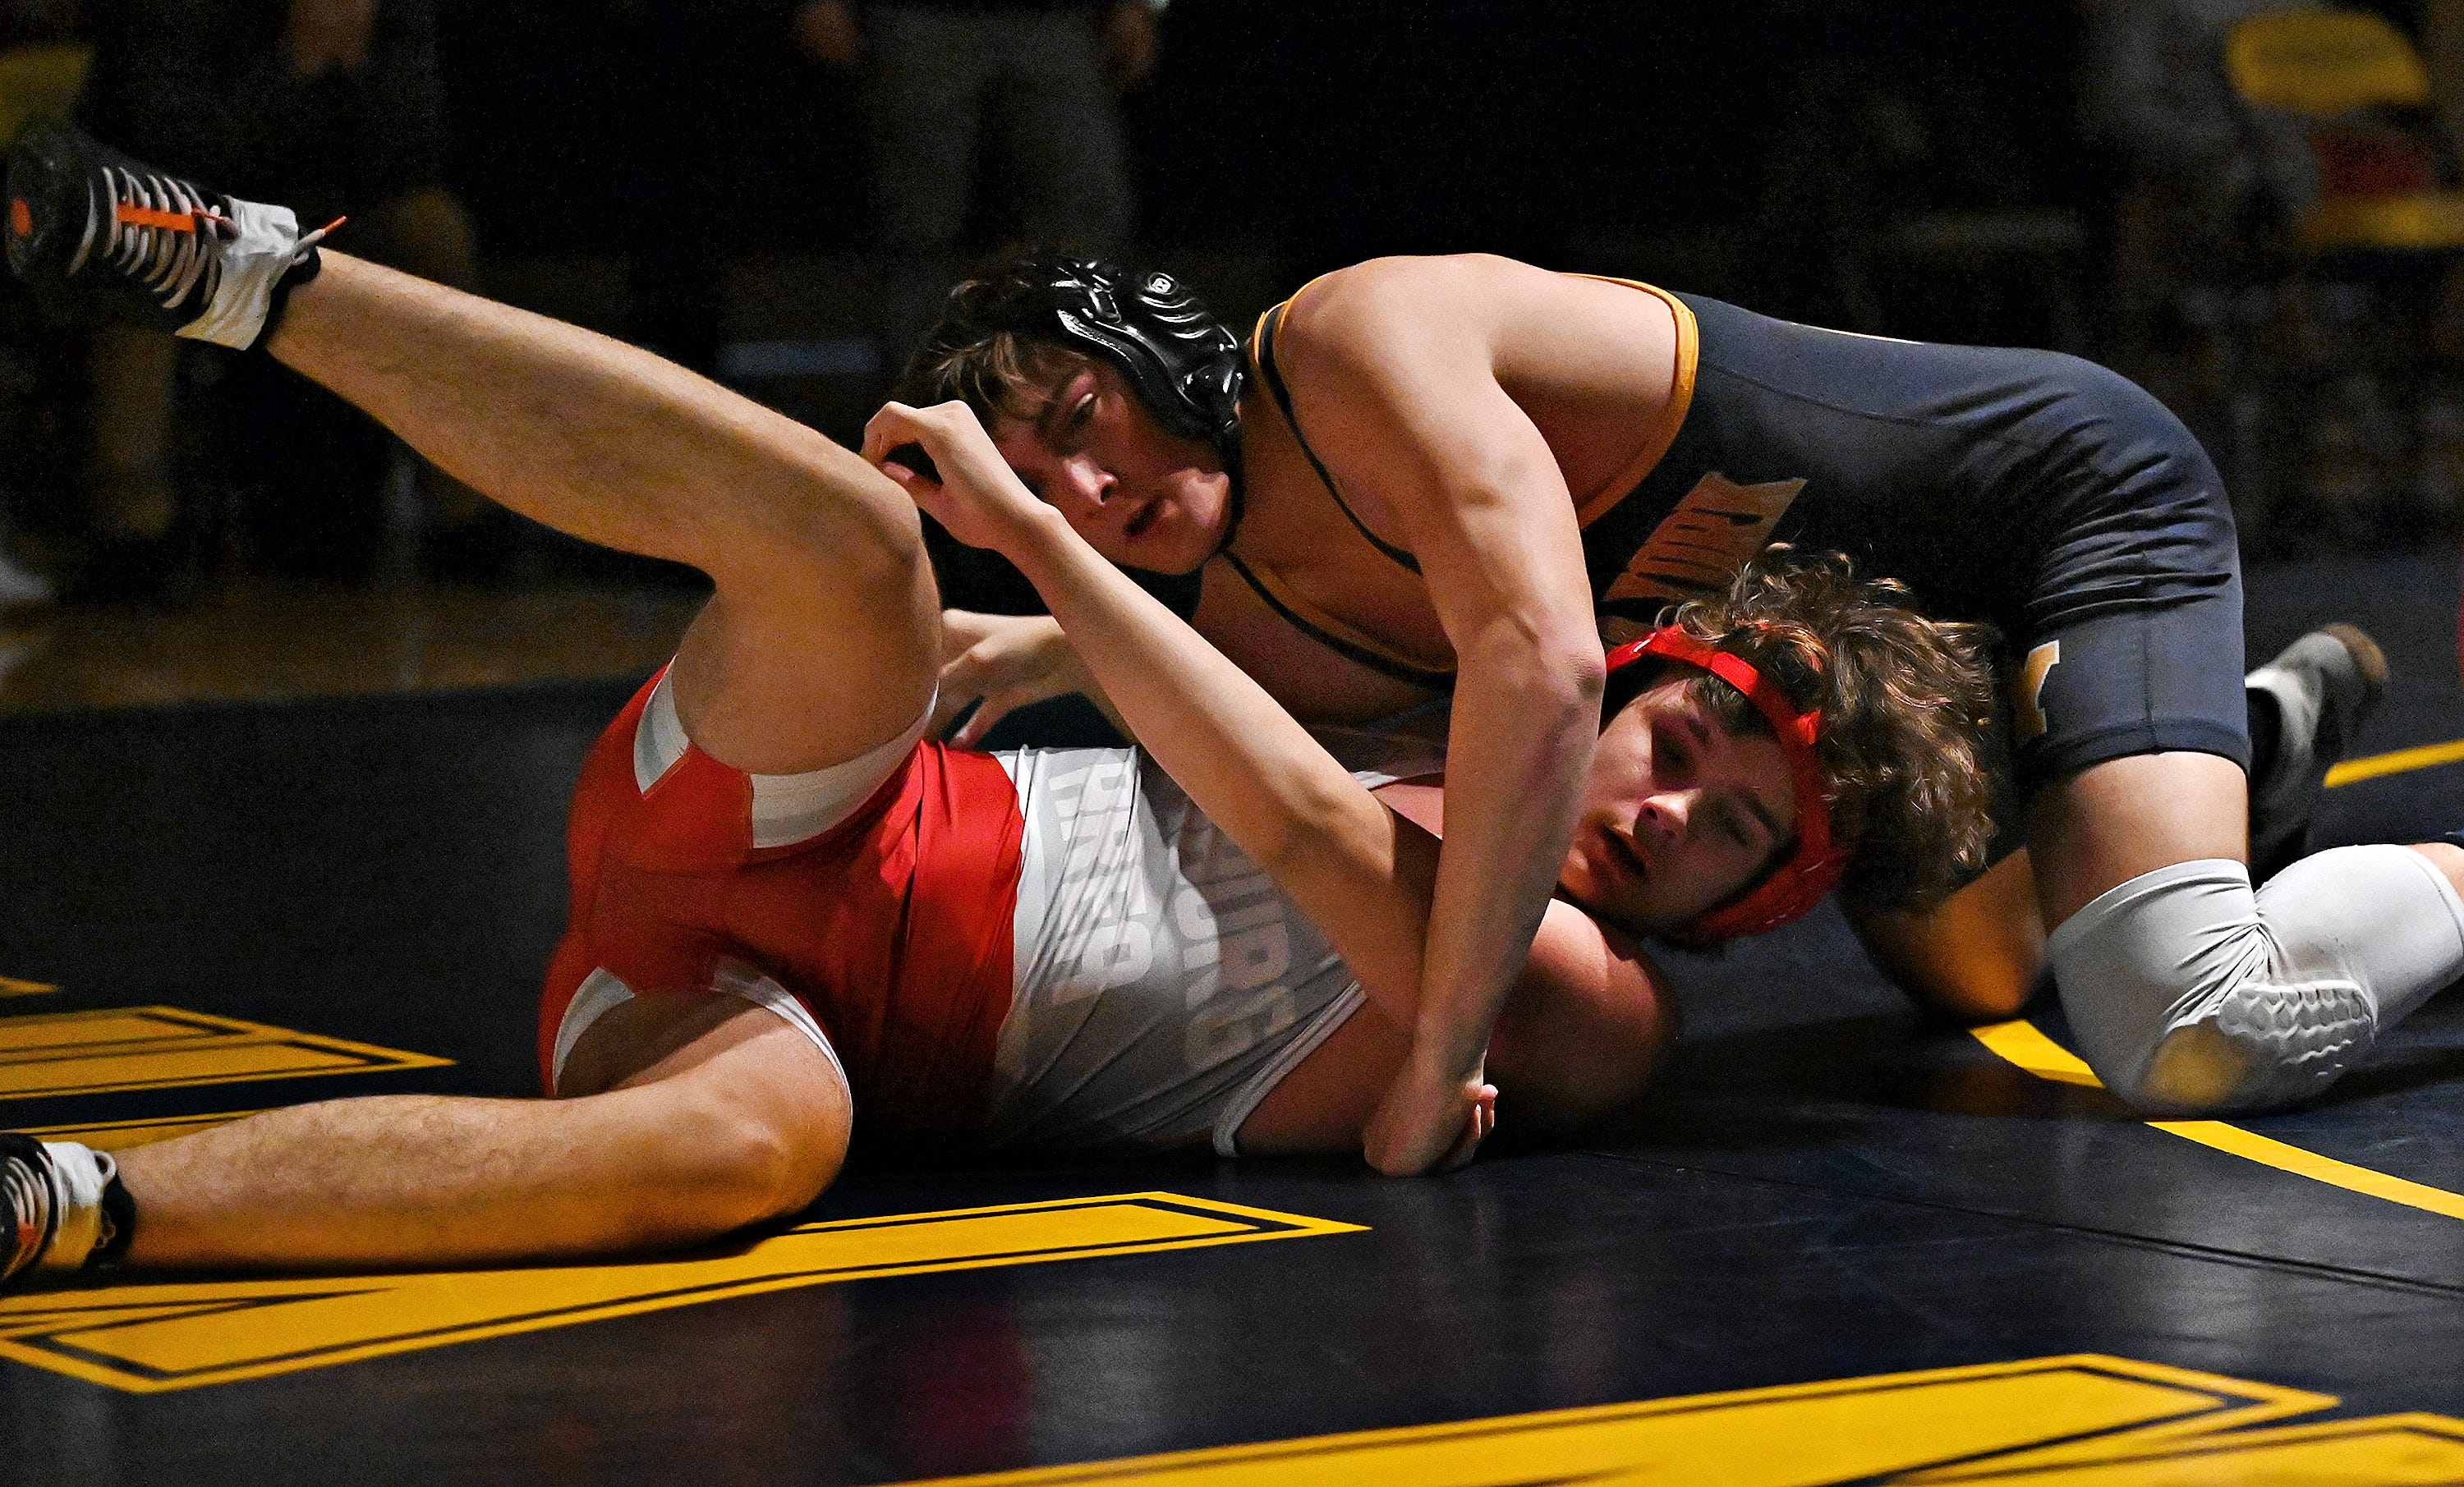 Eastern York’s Cole Staker, back, and Hamburg’s Noah Thebeau compete in the 189-pound weight class during PIAA District 3, Class 2-A first round wrestling action at Eastern York High School in Lower Windsor Township, Monday, Jan. 30, 2023. Staker would win the match and Eastern York would win the meet 50-22. Dawn J. Sagert photo